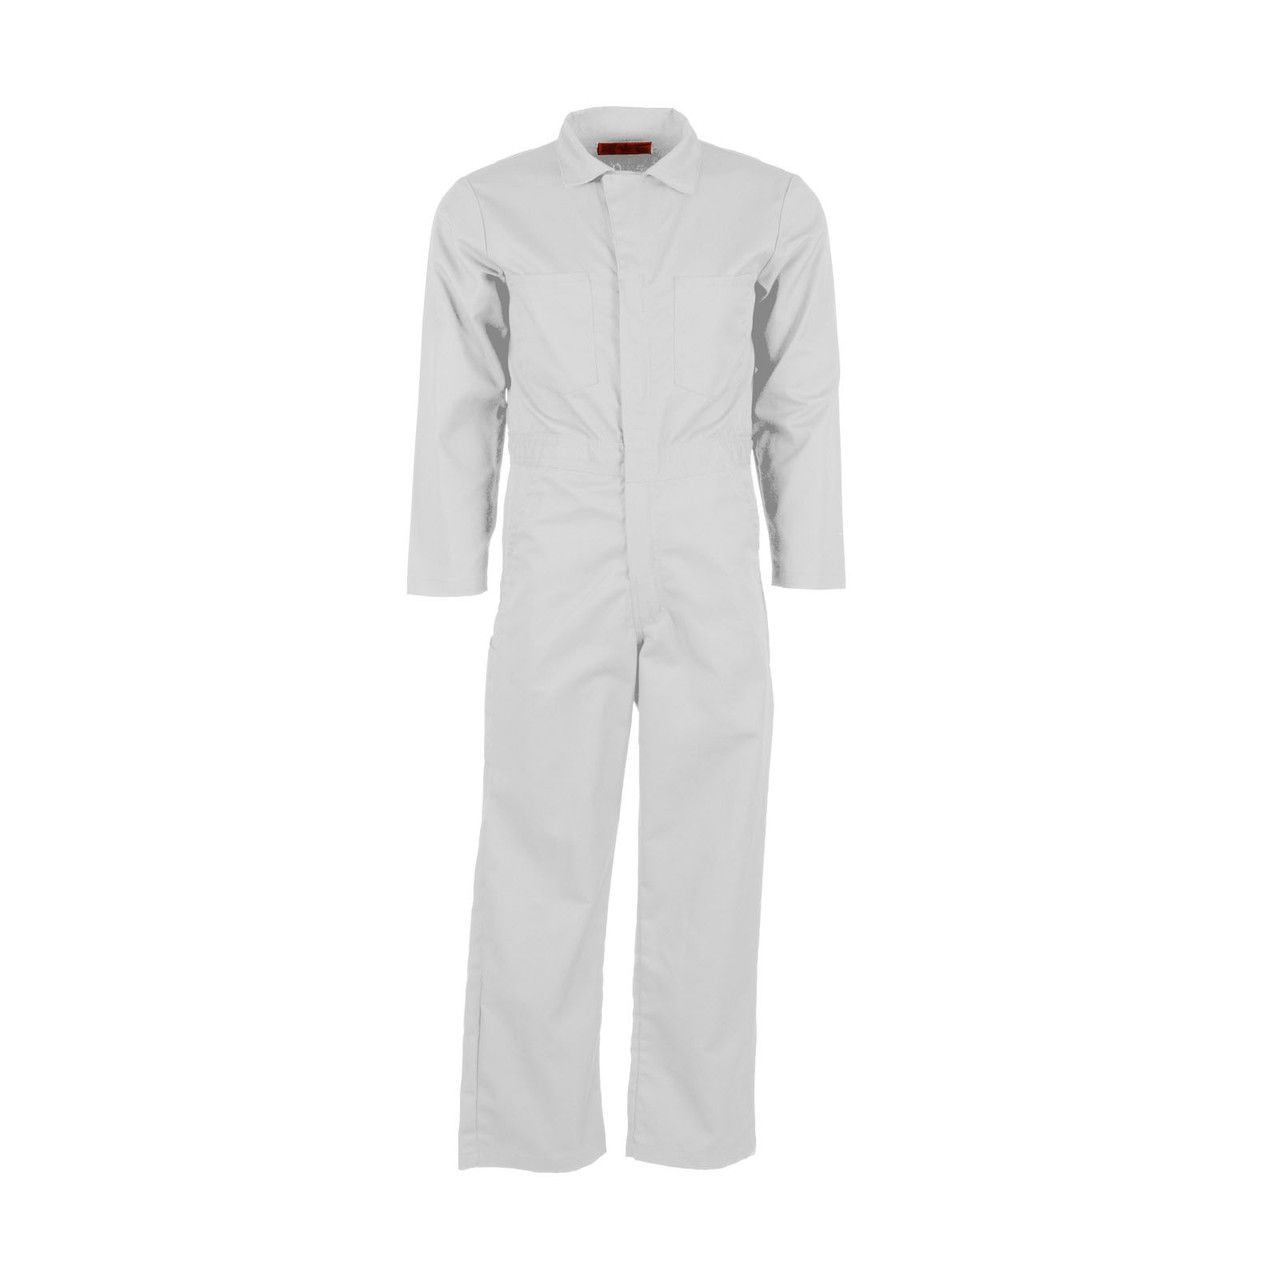 What makes the CV10WH White Coverall by Pinnacle Textile the perfect uniform coveralls?